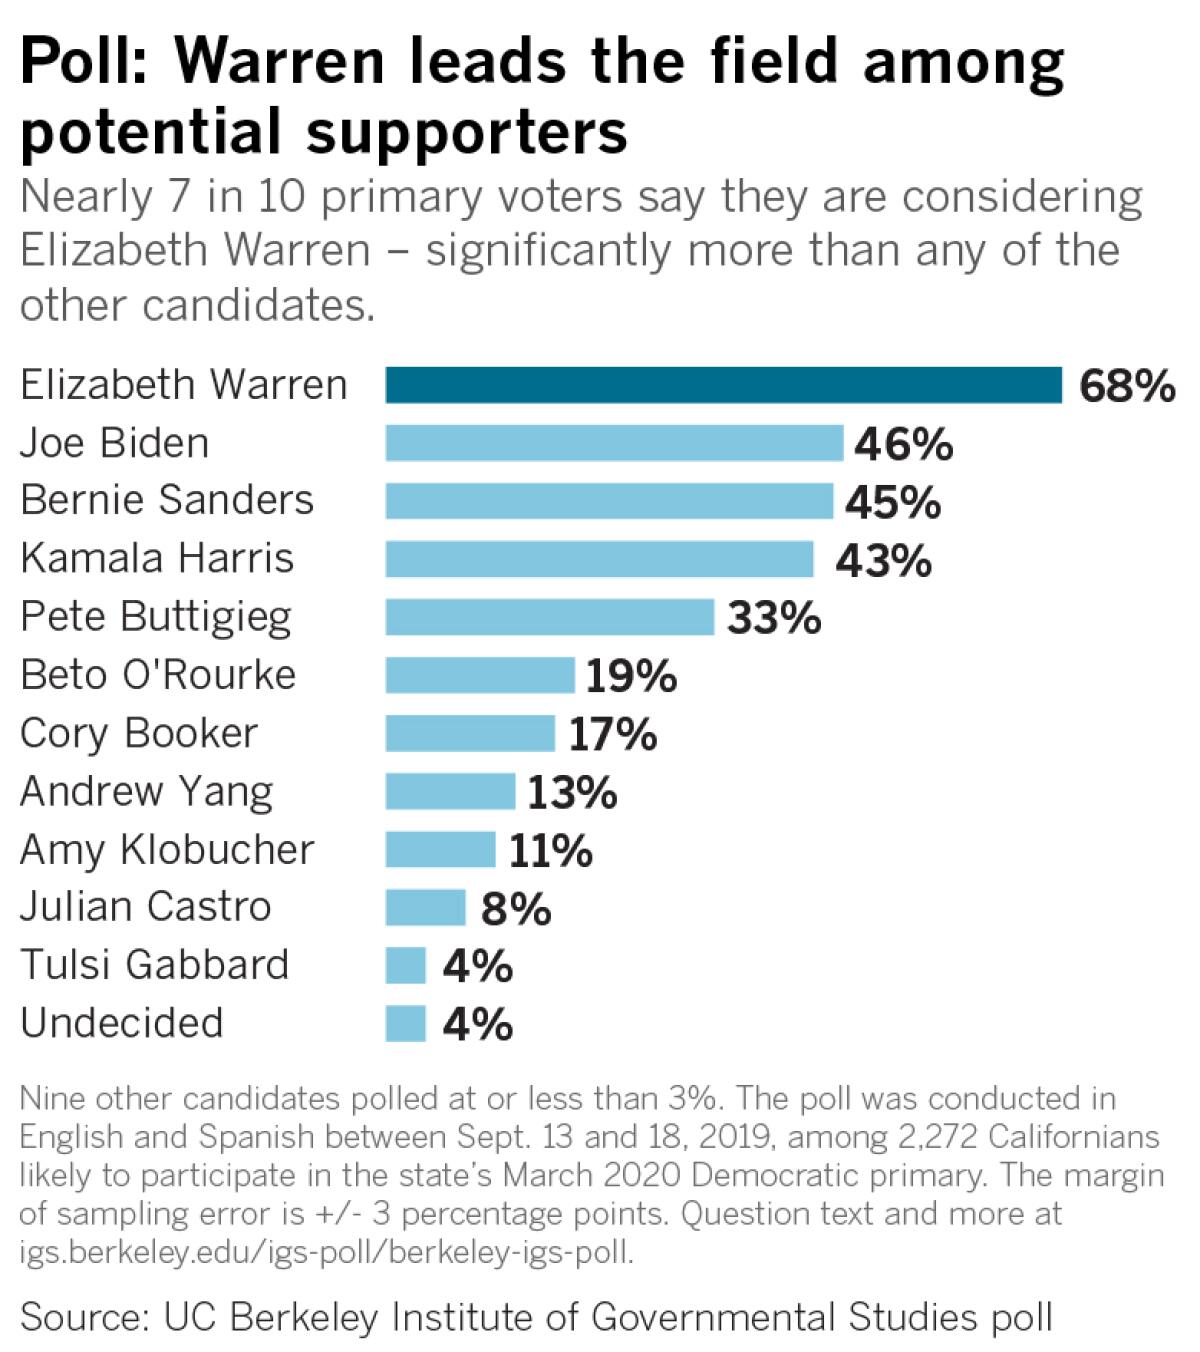 Nearly 7 in 10 primary voters say they are considering Elizabeth Warren –?significantly more than any other candidate.